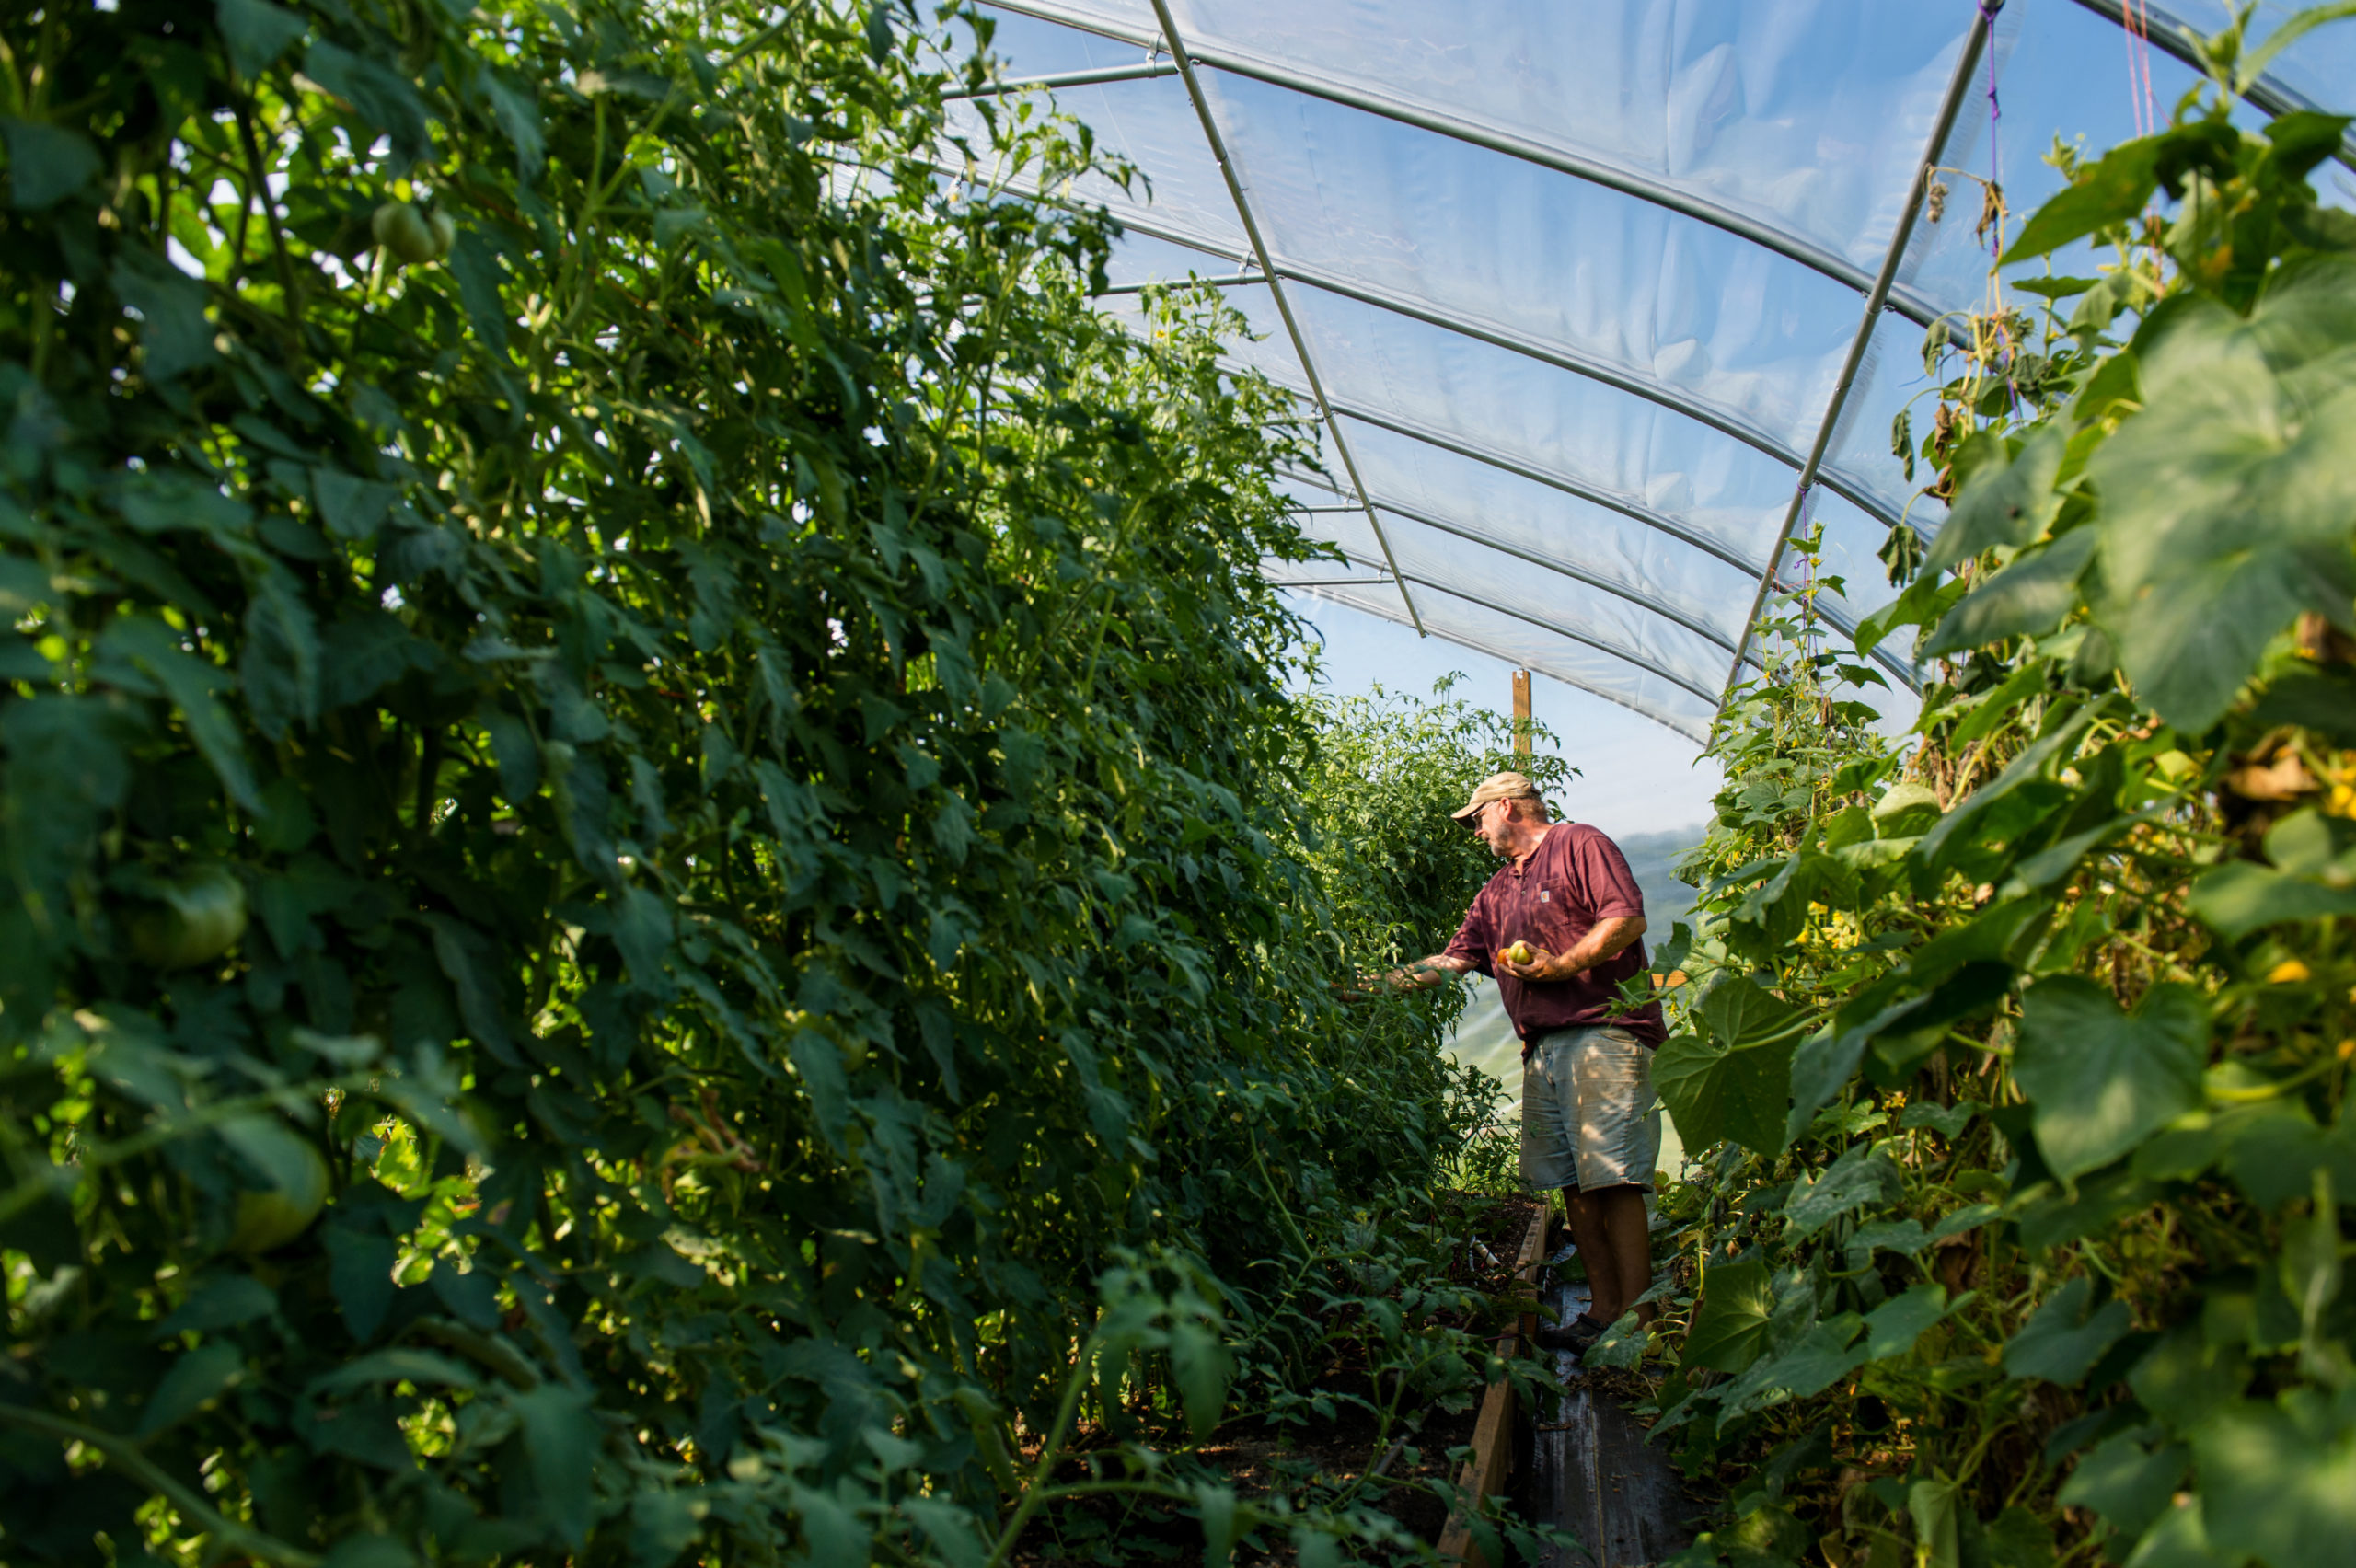 A farmer harvests crops between two rows of lush greenery. Over top there is a blue sky and the hoops of the greenhouse.